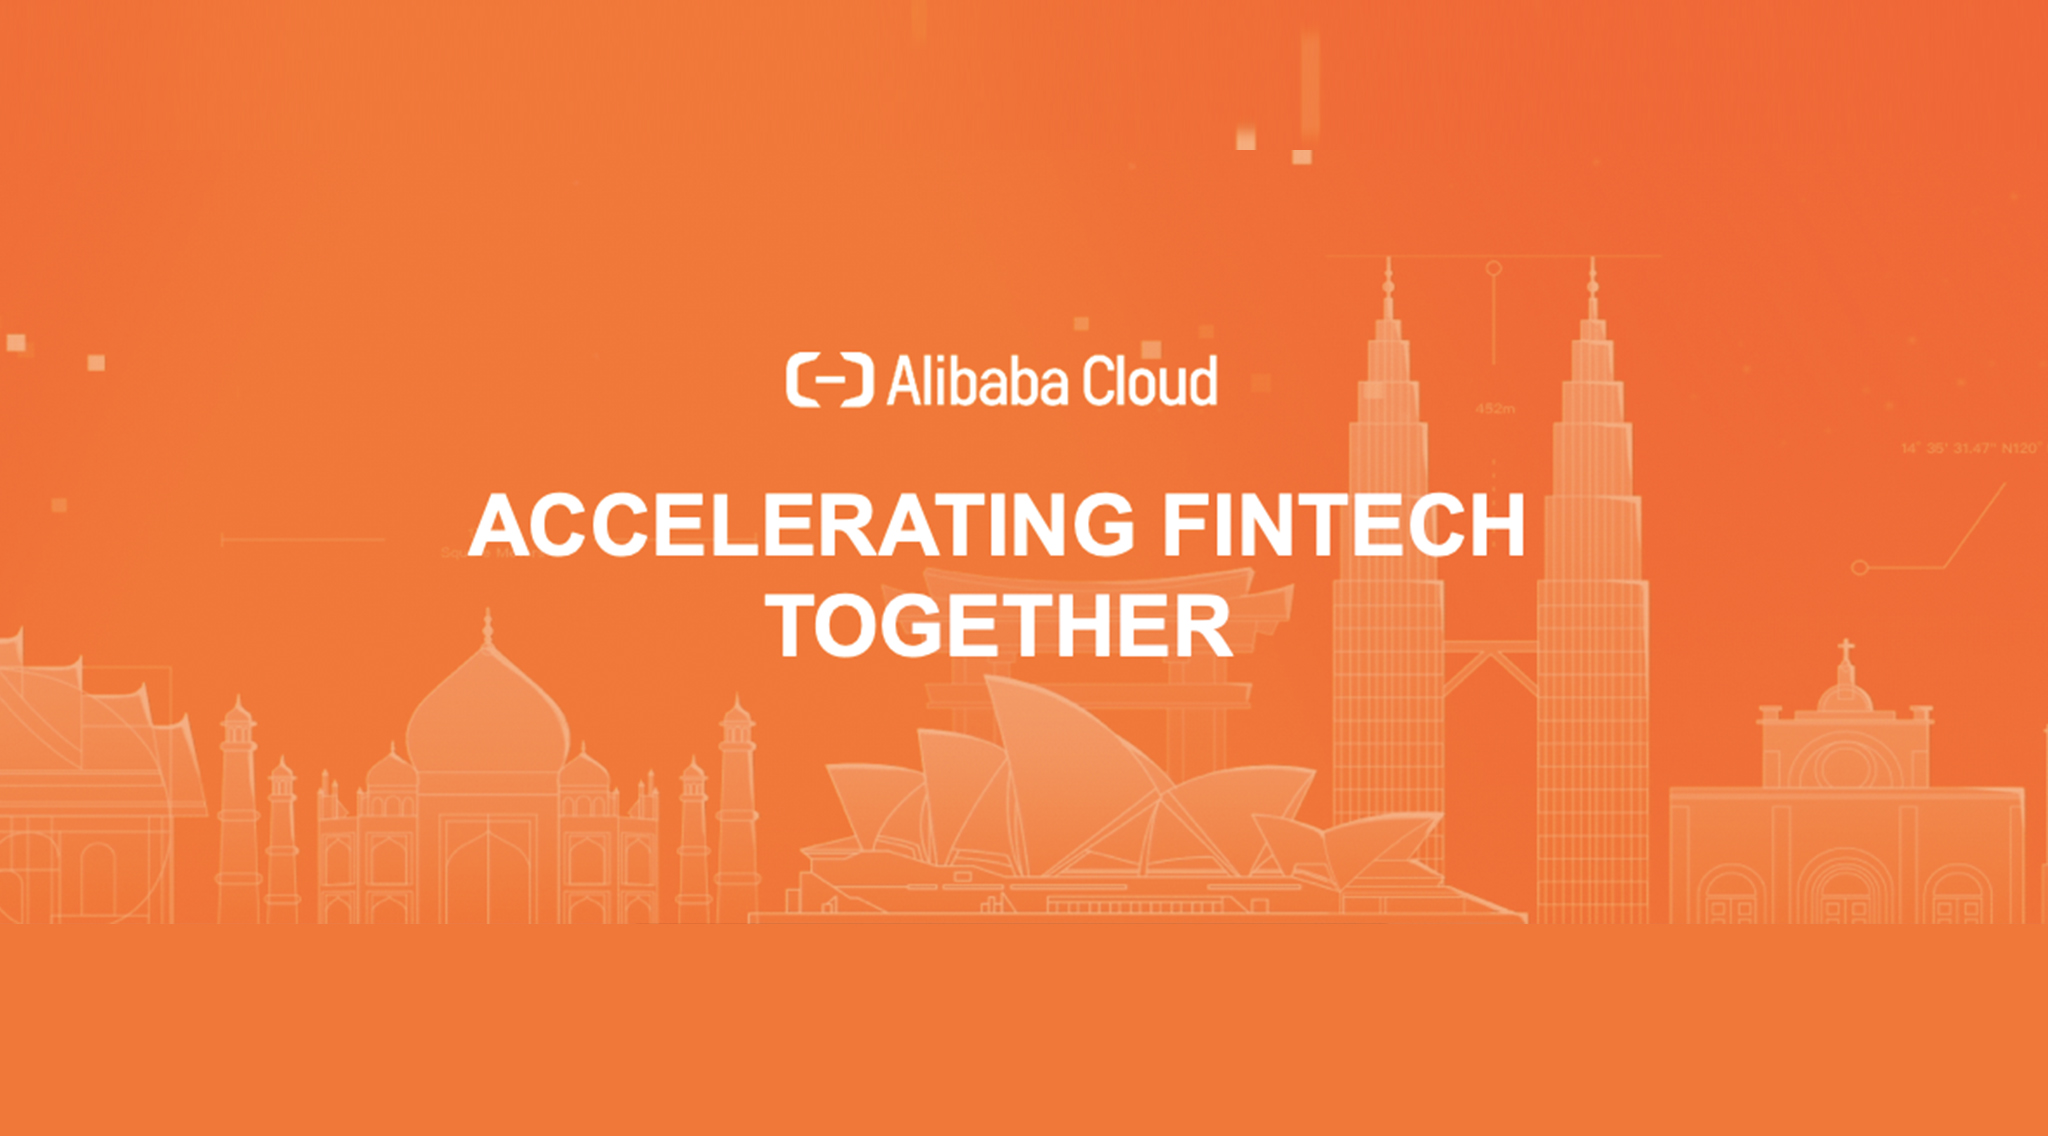 Alibaba Cloud’s New Report Urges Financial Institutions to Embrace Cloud Technologies